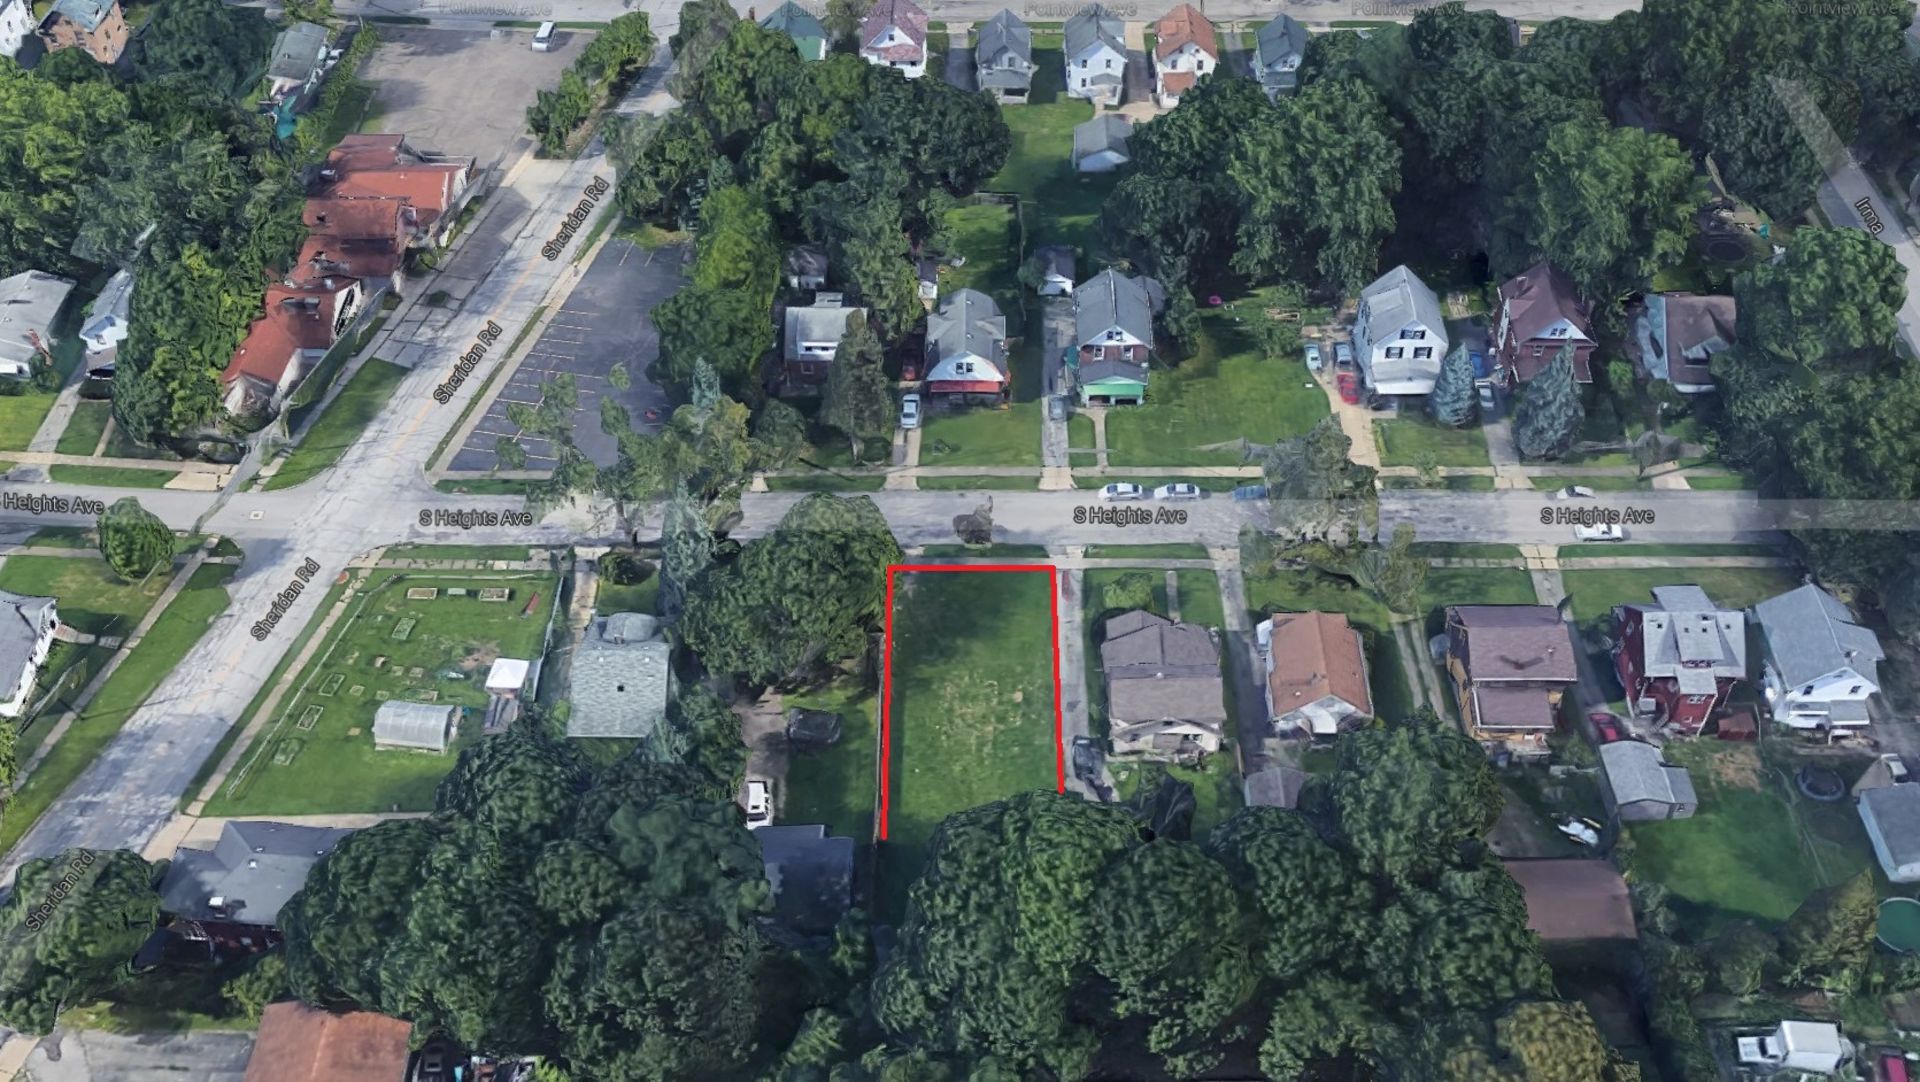 PLOT OF LAND AT 1921 S HEIGHTS AVENUE, YOUNGSTOWN, OHIO - Image 2 of 7